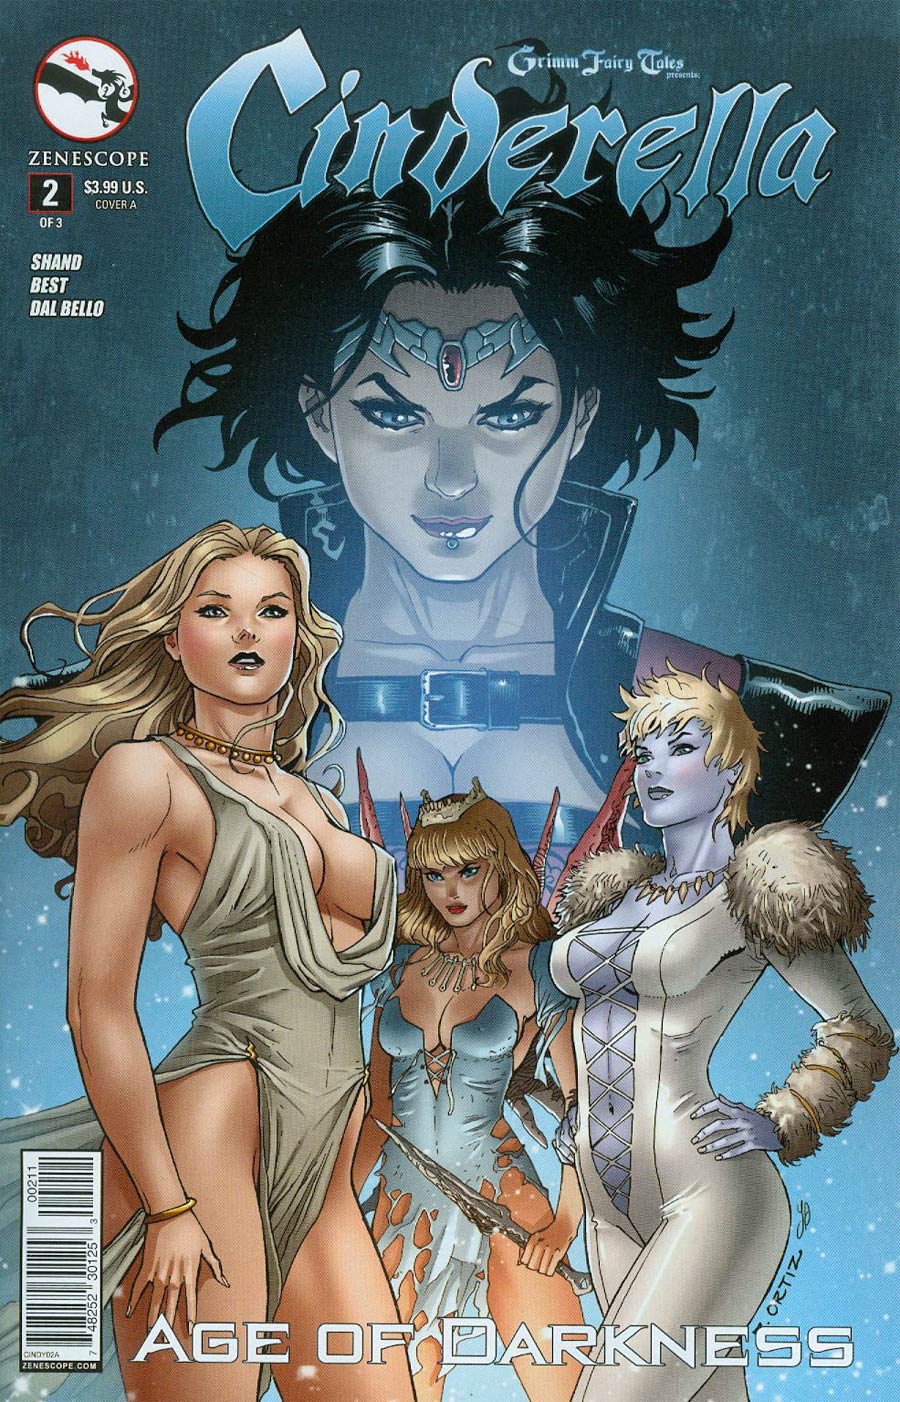 Grimm Fairy Tales Presents Cinderella #2 Cover A Richard Ortiz (Age Of Darkness Tie-In)